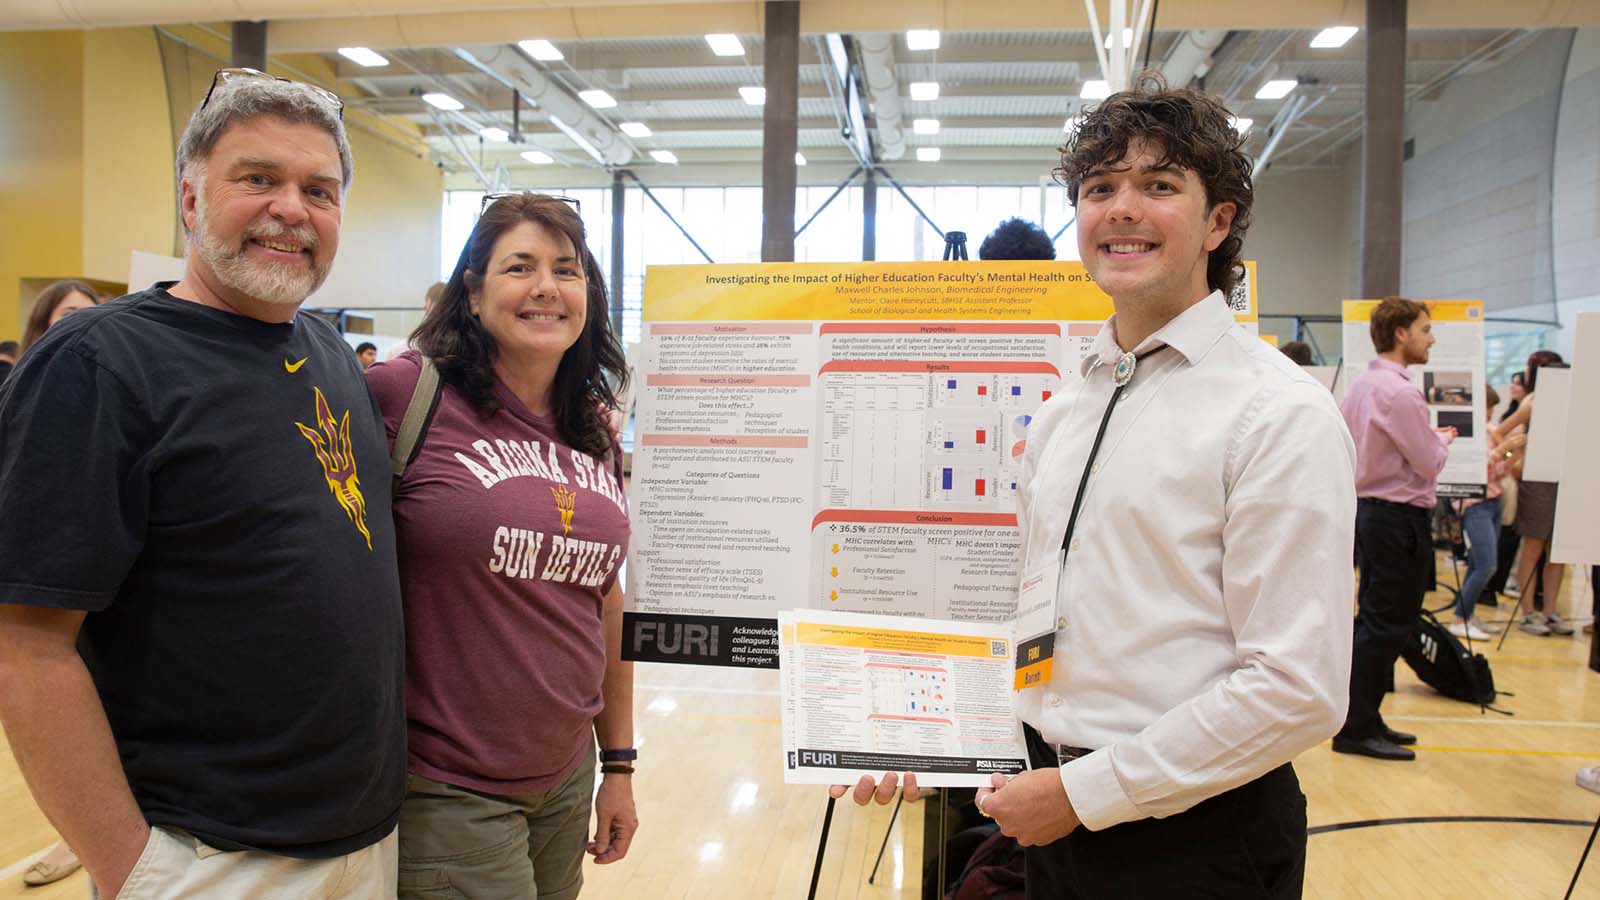 An ASU Engineering student and his parents stand together at his student research presentation poster at a student research showcase event.